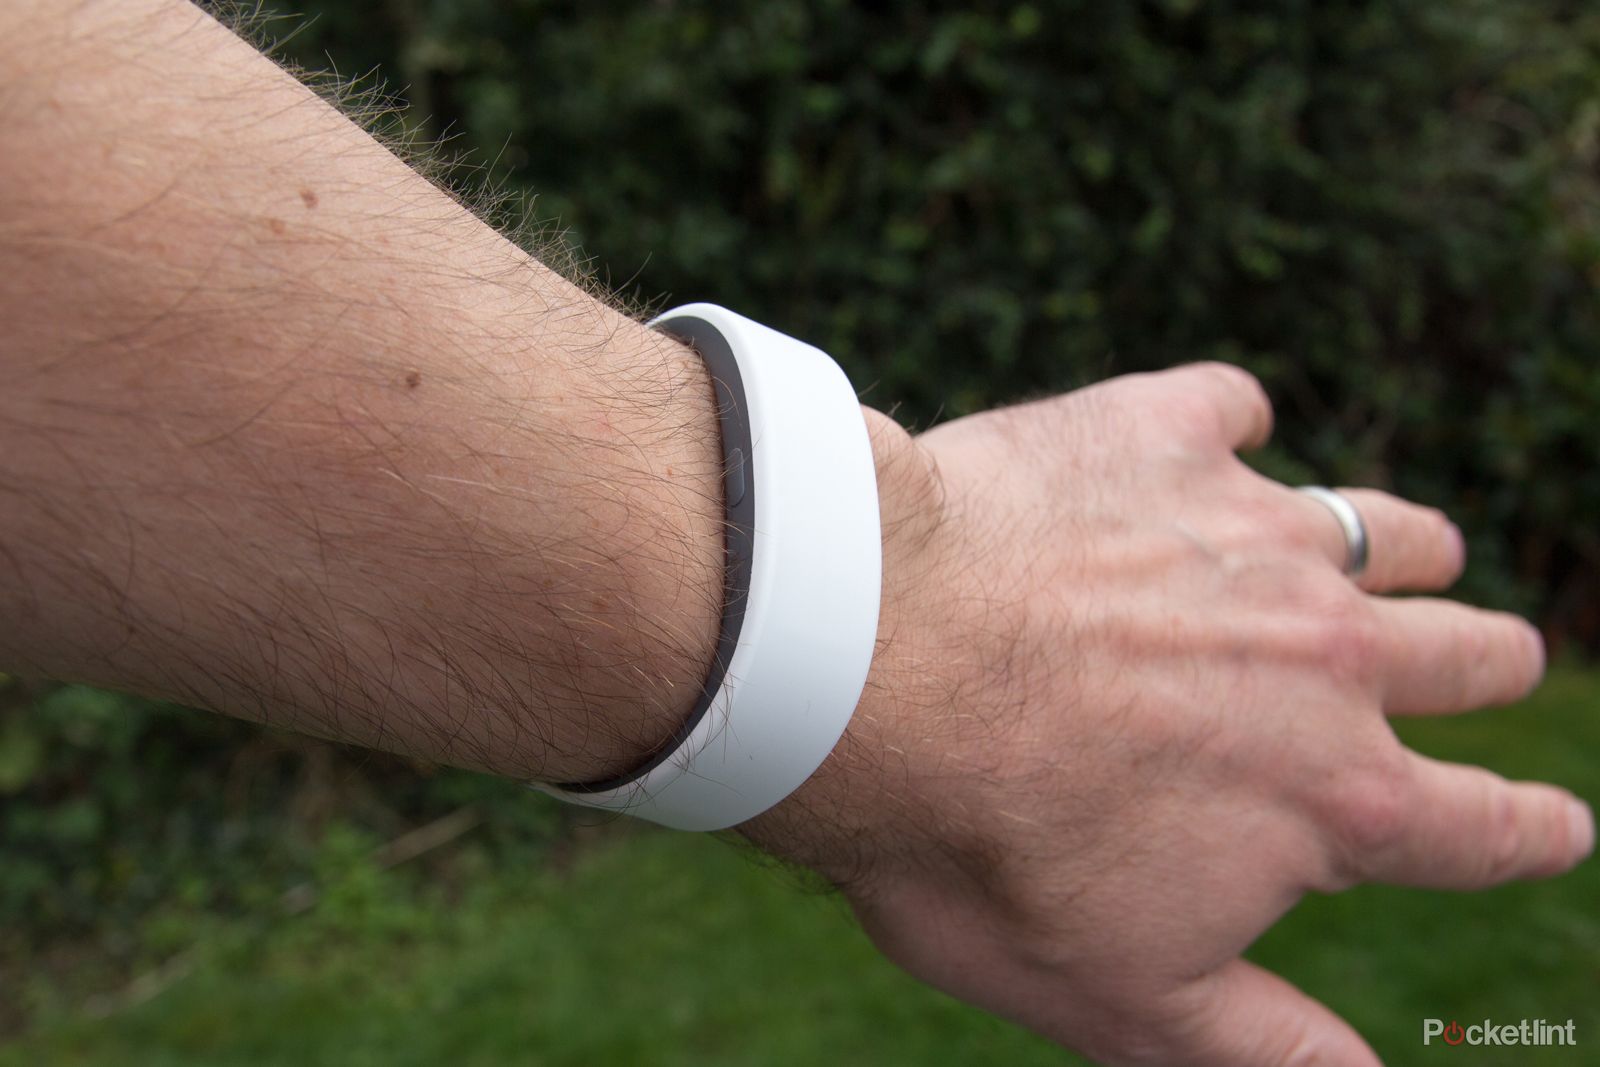 sony smartband 2 review image 10